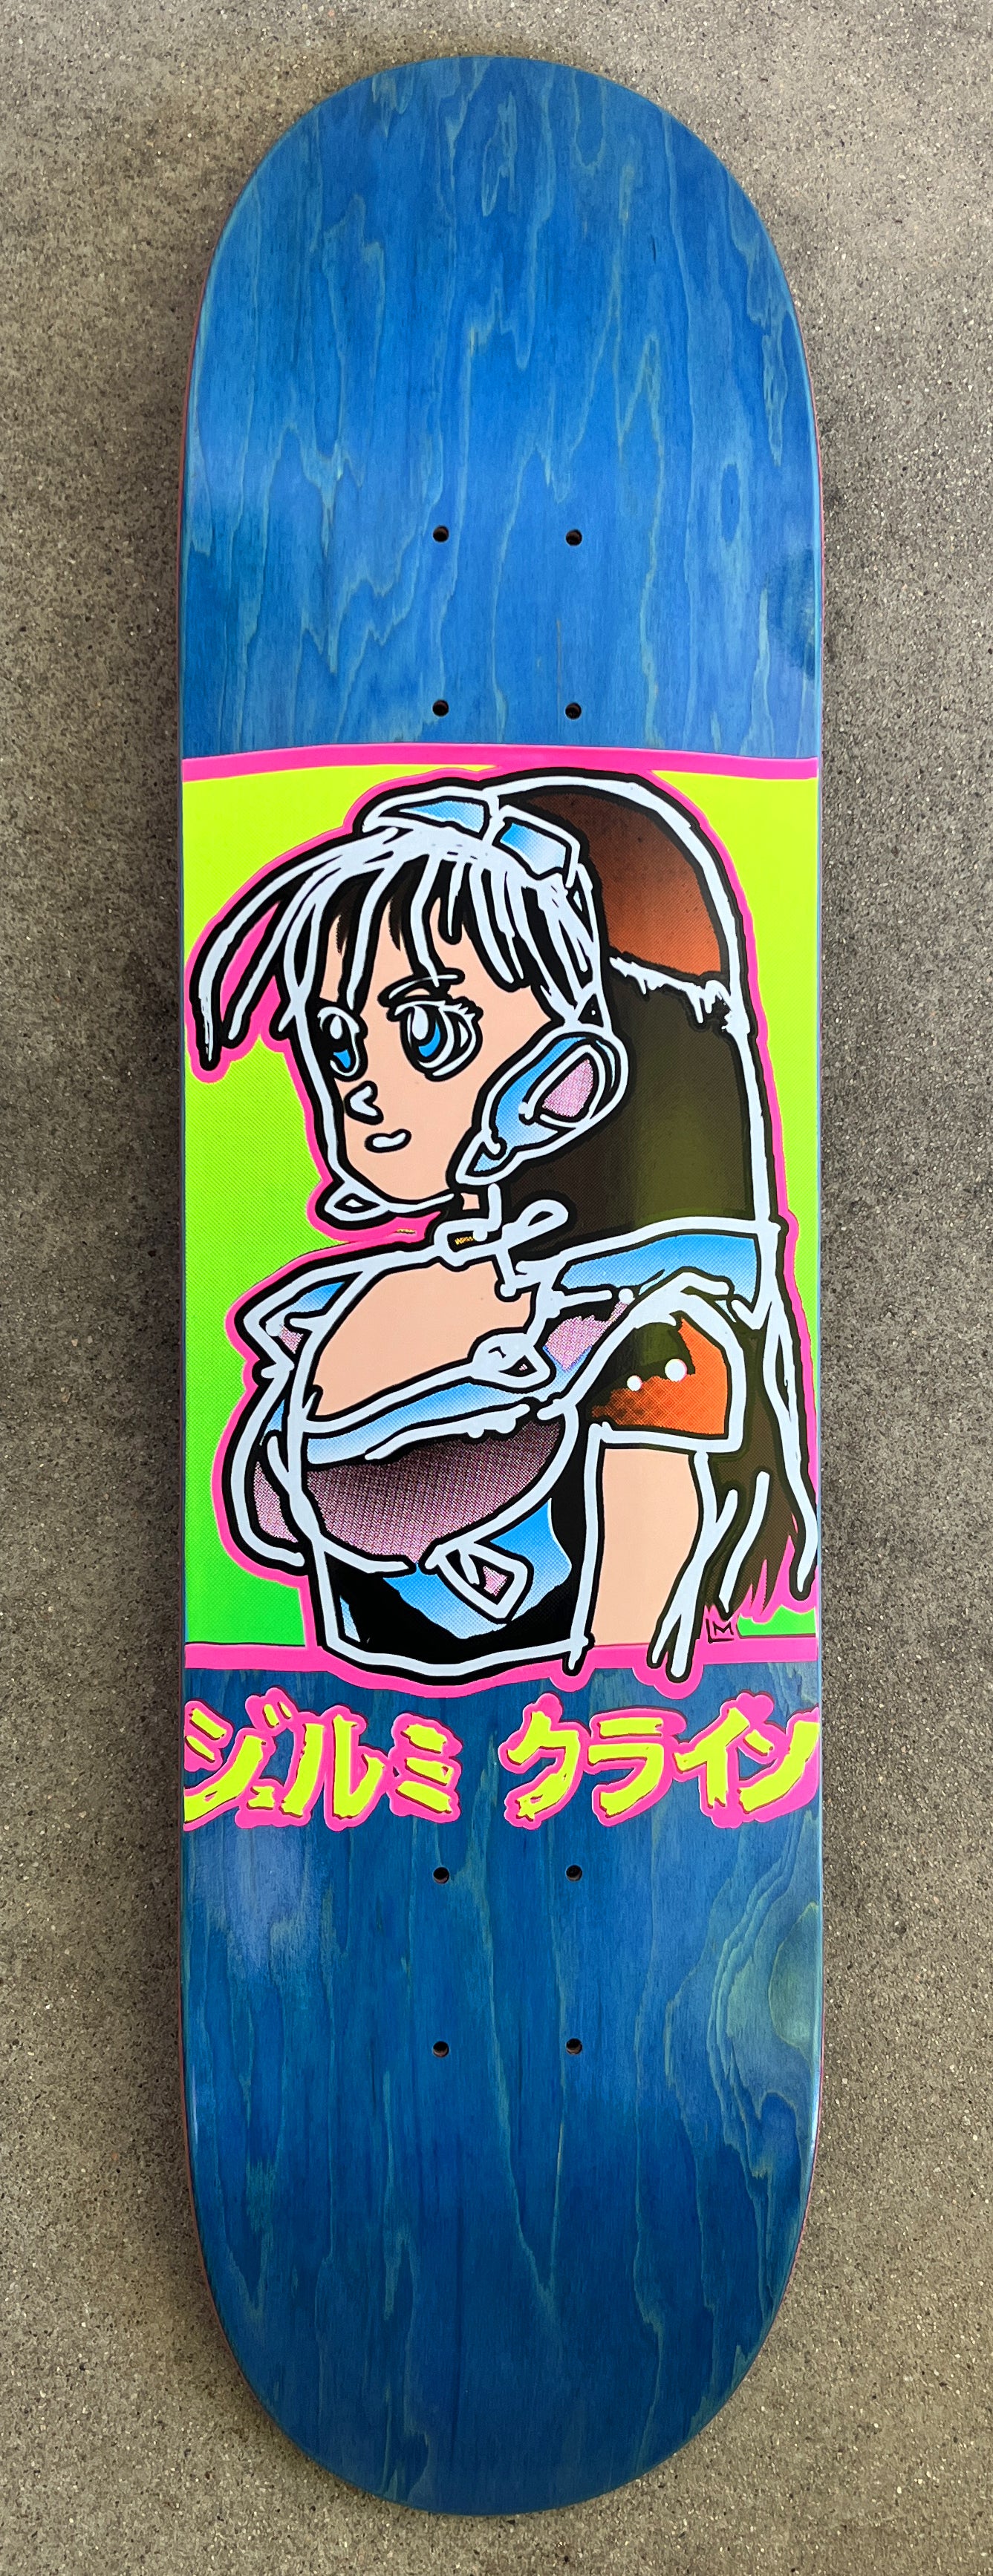 LANCE dream girl board 8.0 X 31.75 - ASSORTED STAIN